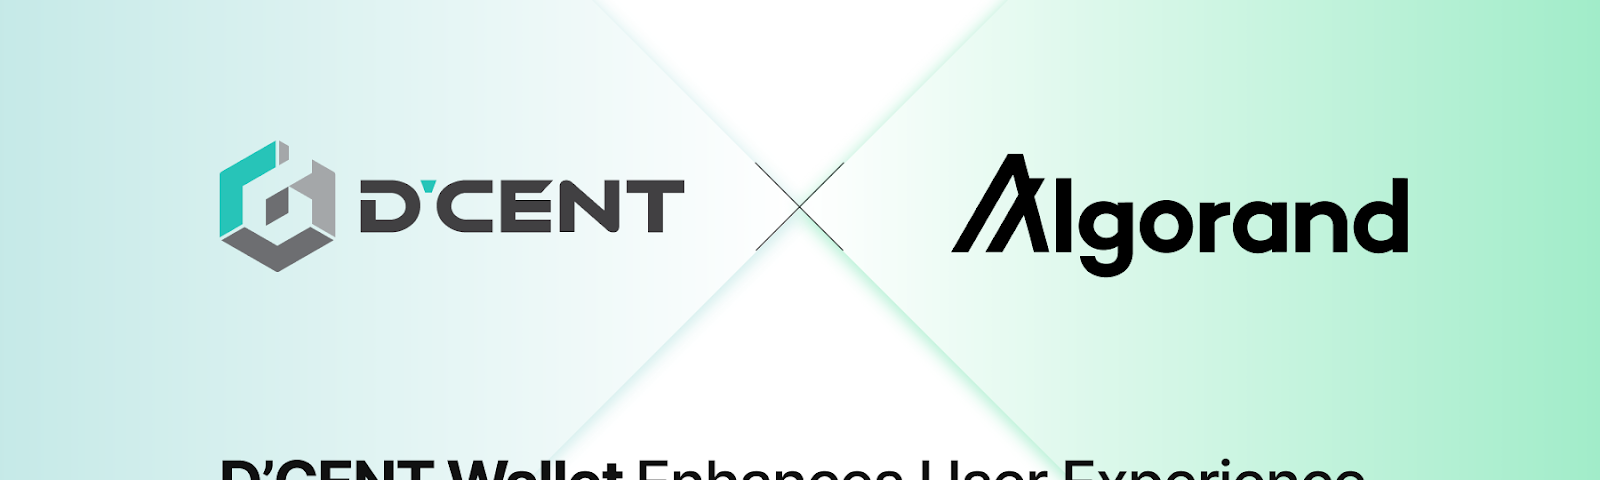 D'CENT Wallet and HashPack have partnered to join the strength of